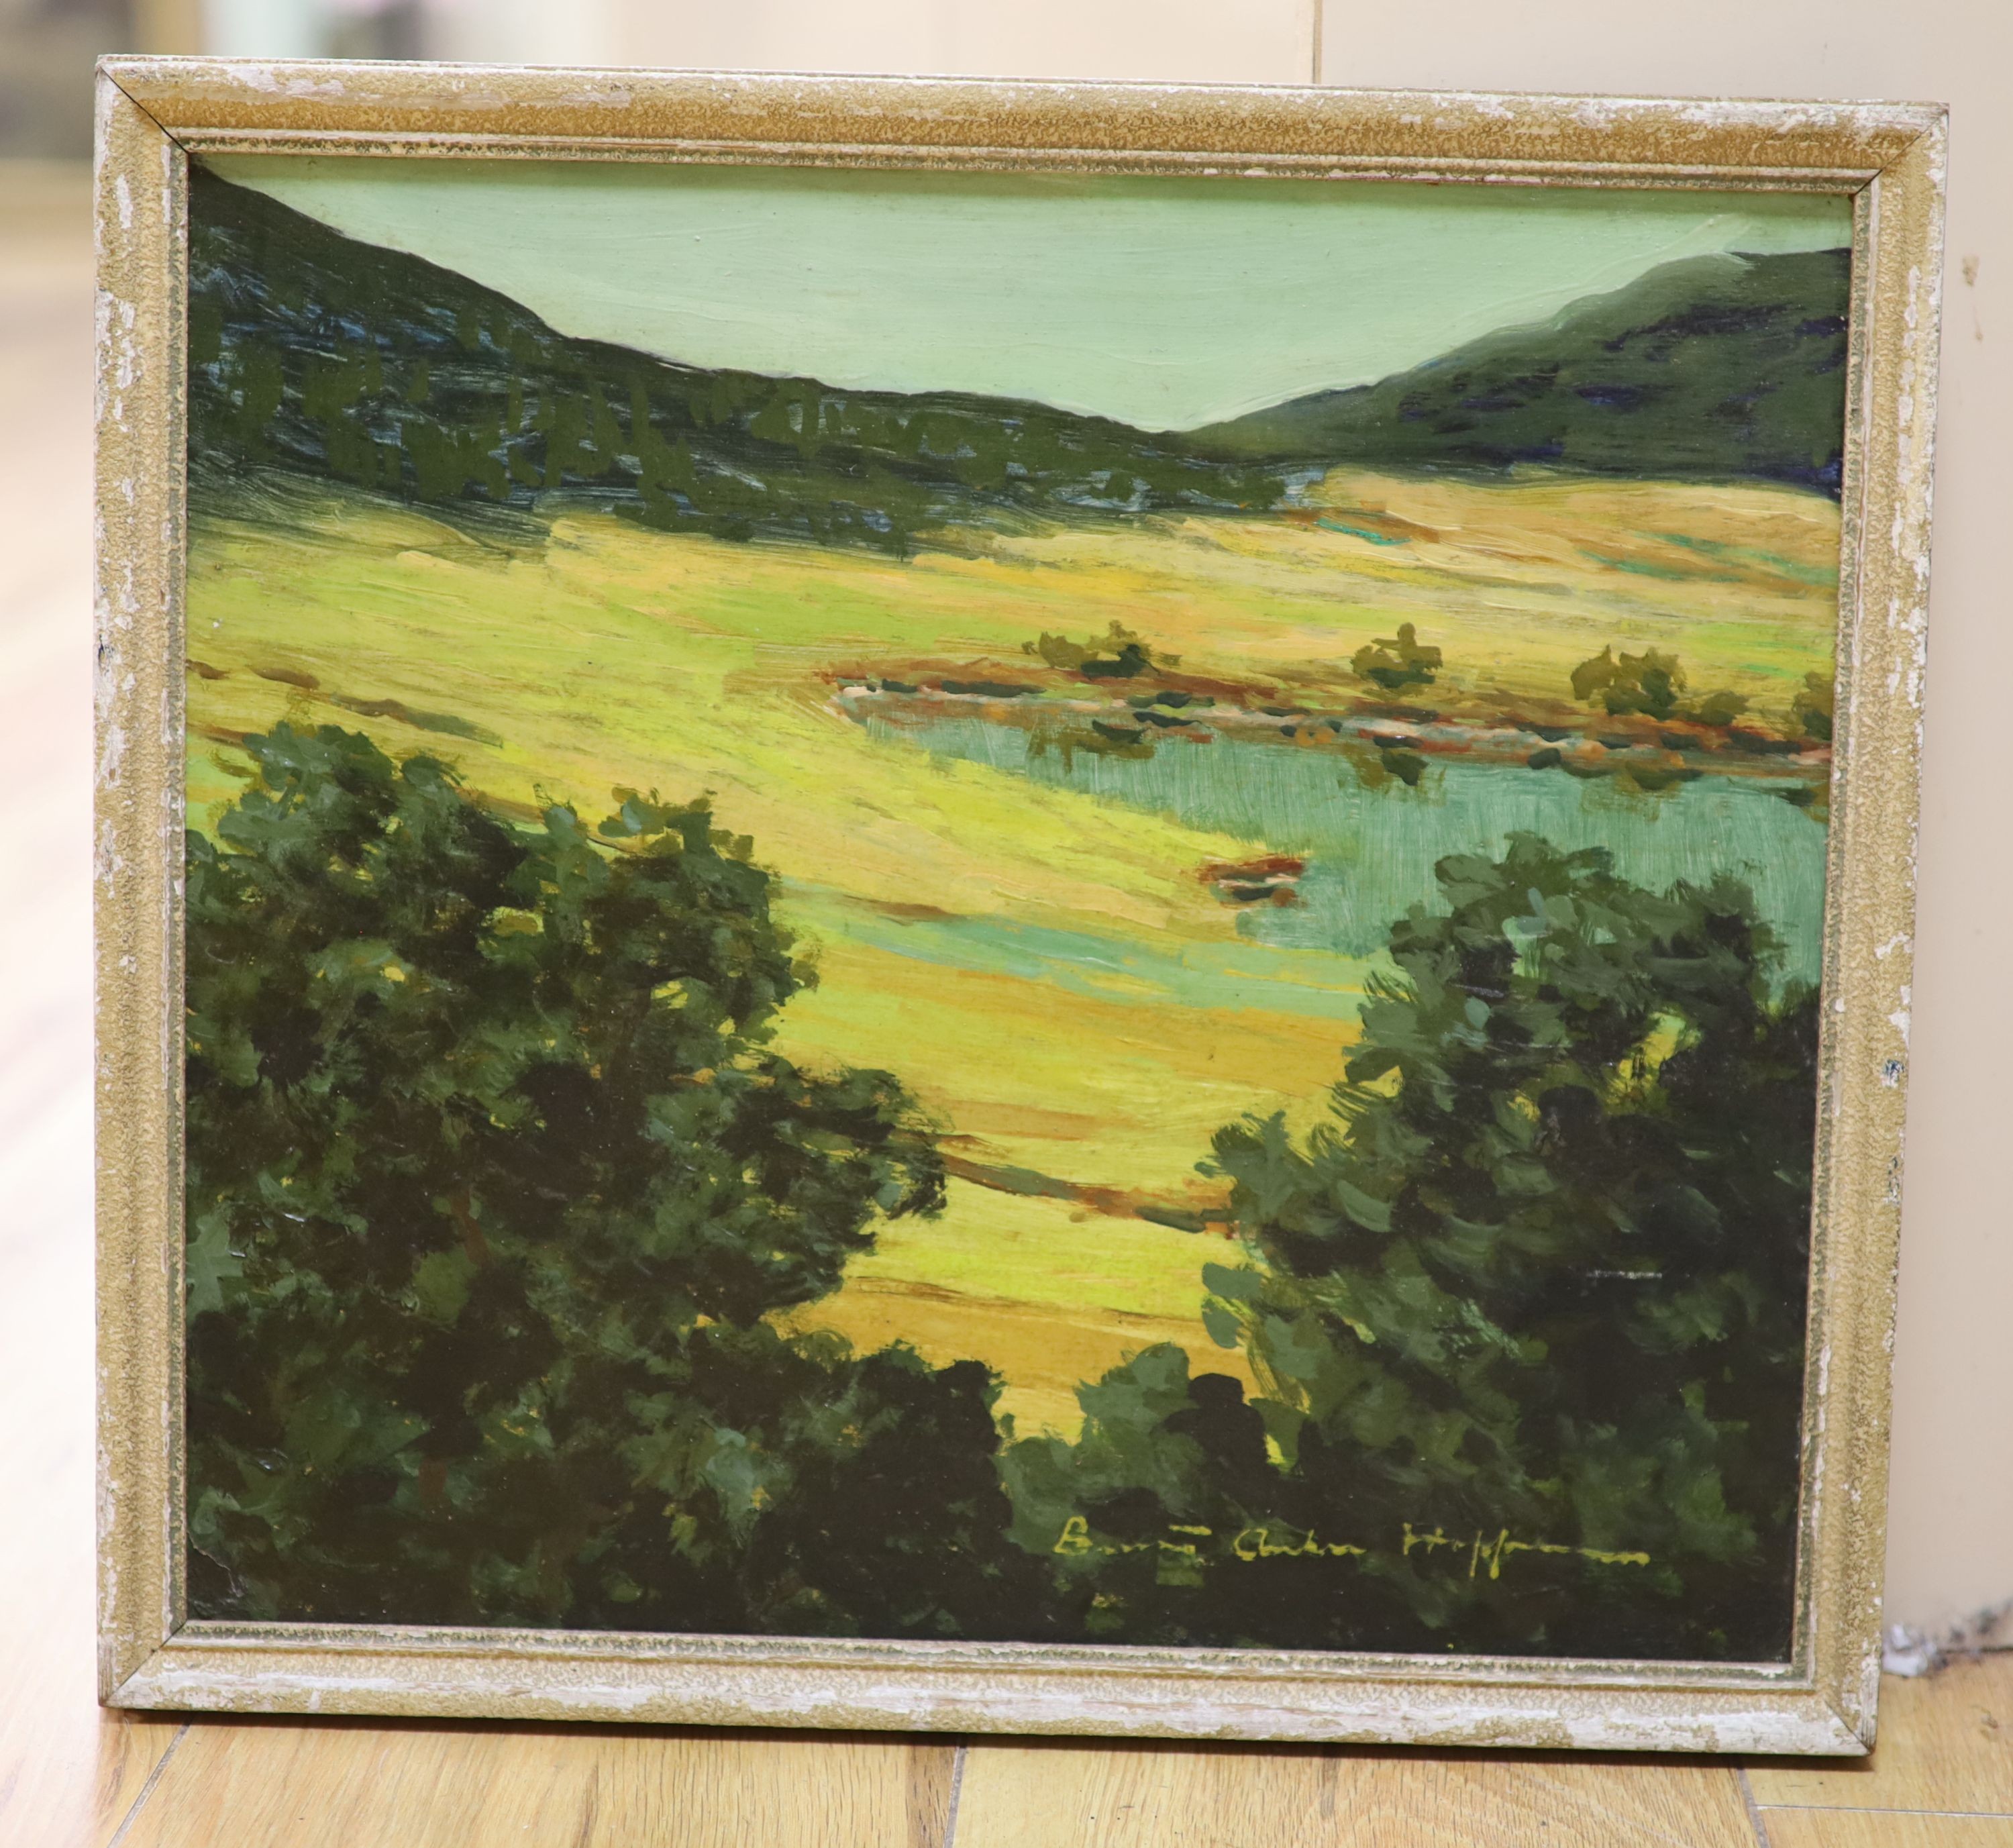 B. Anton Hoffmann, oil on card, Landscape with lake and trees, signed, 30 x 33cm.